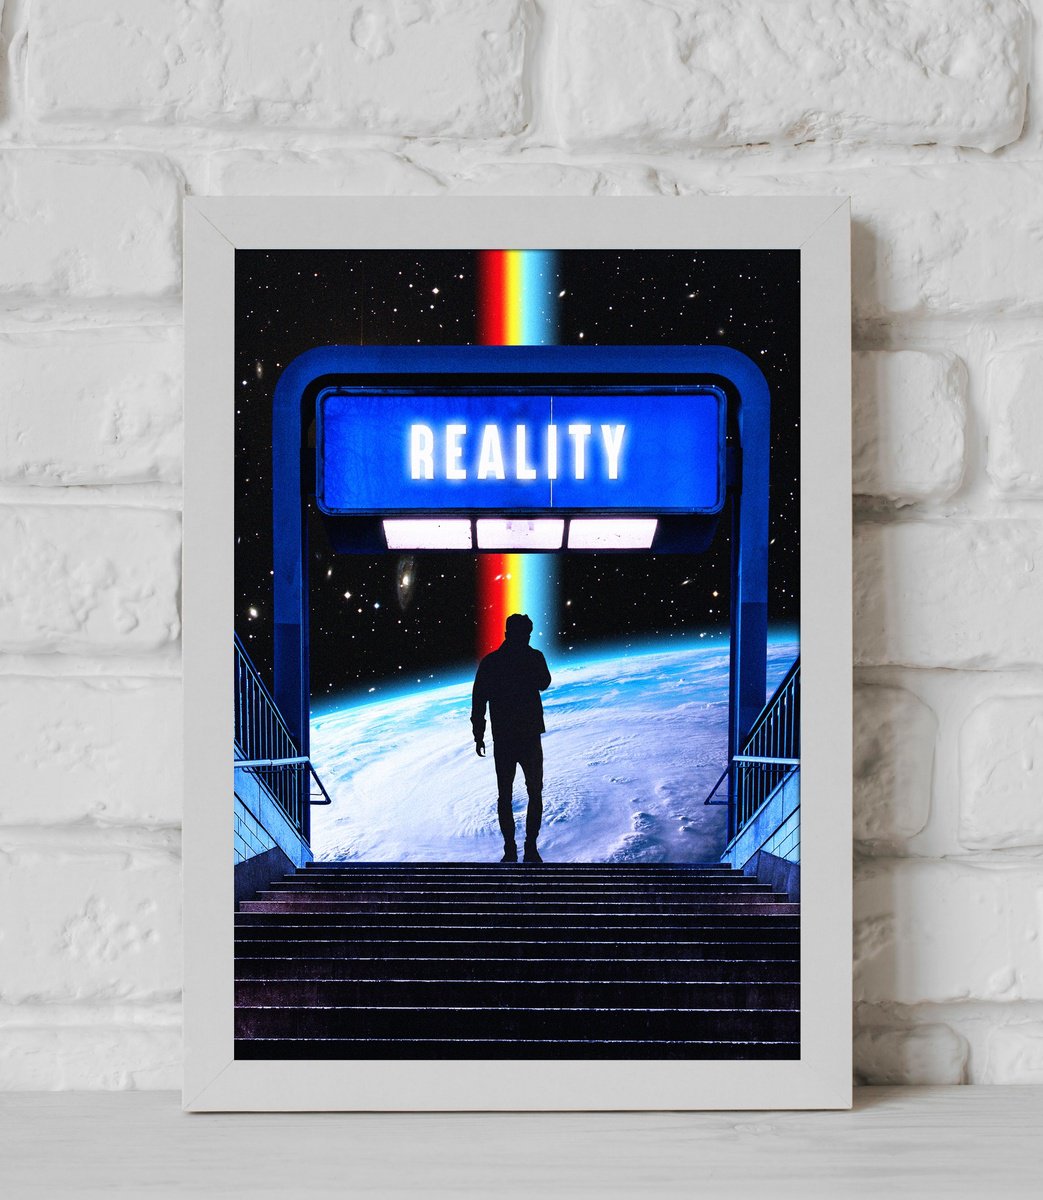 Welcome to Reality by Darius Comi